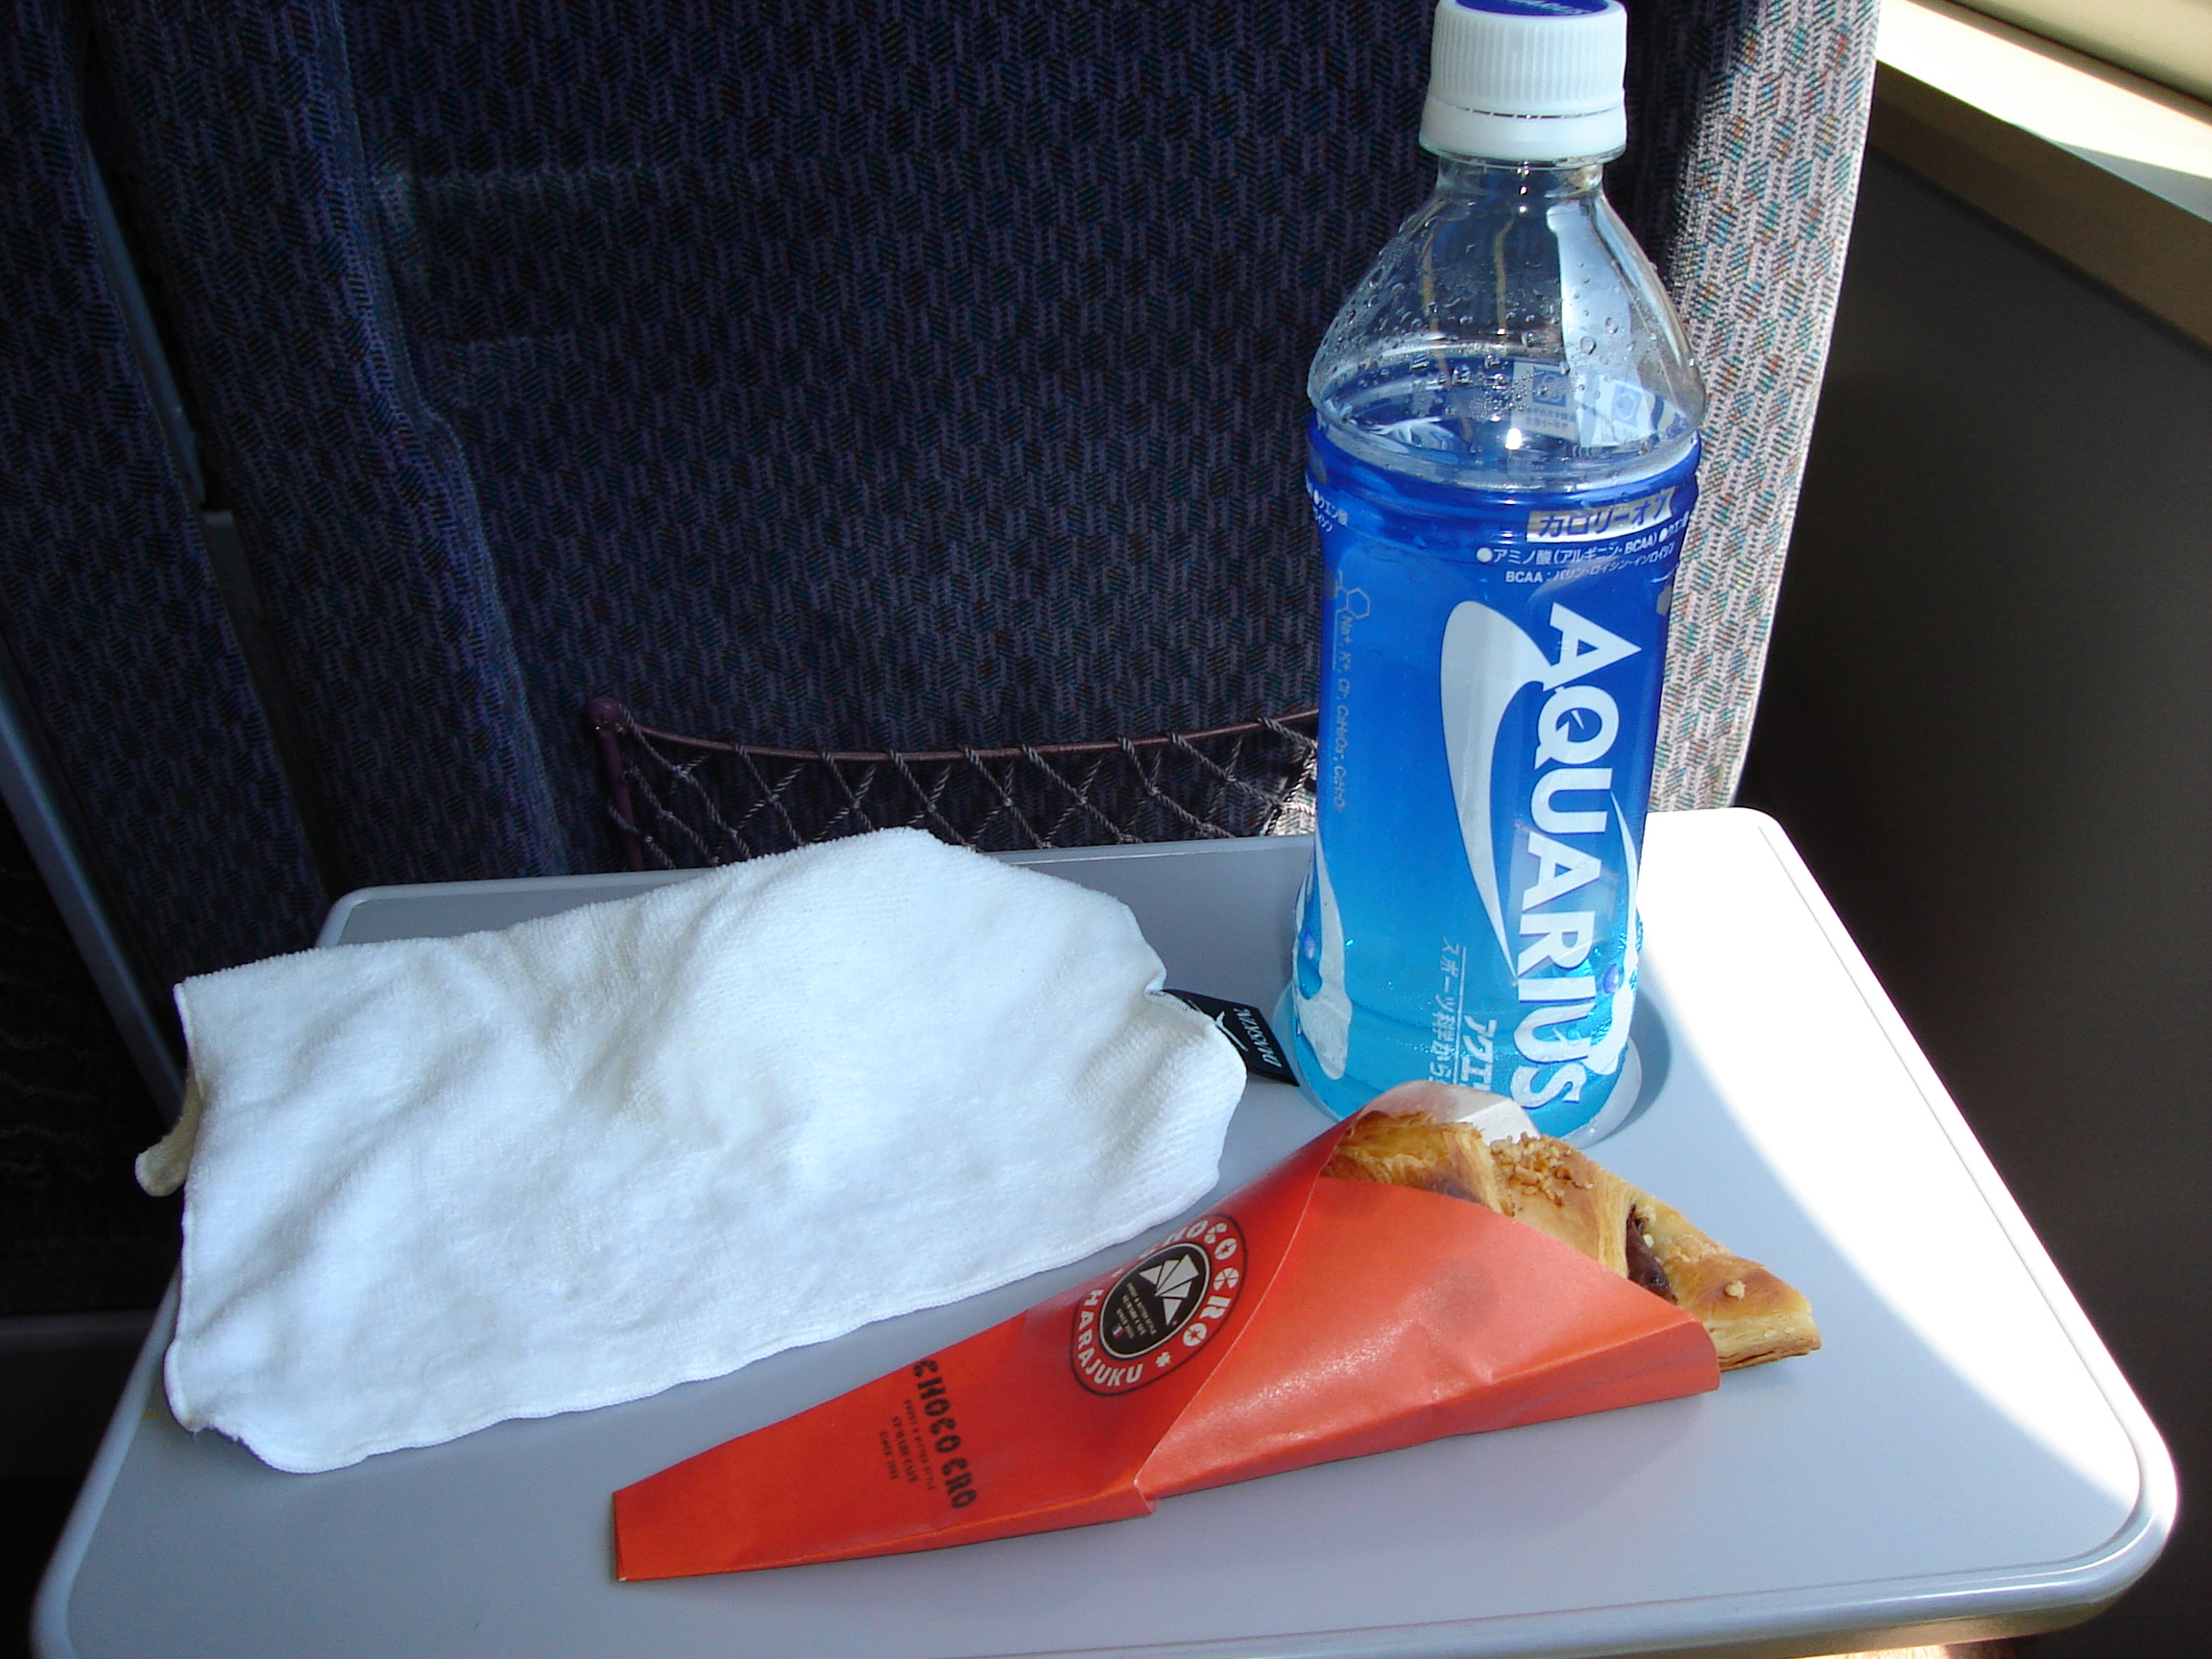 train seat table with a croissant in a wrapper and a bottle of aquarius drink